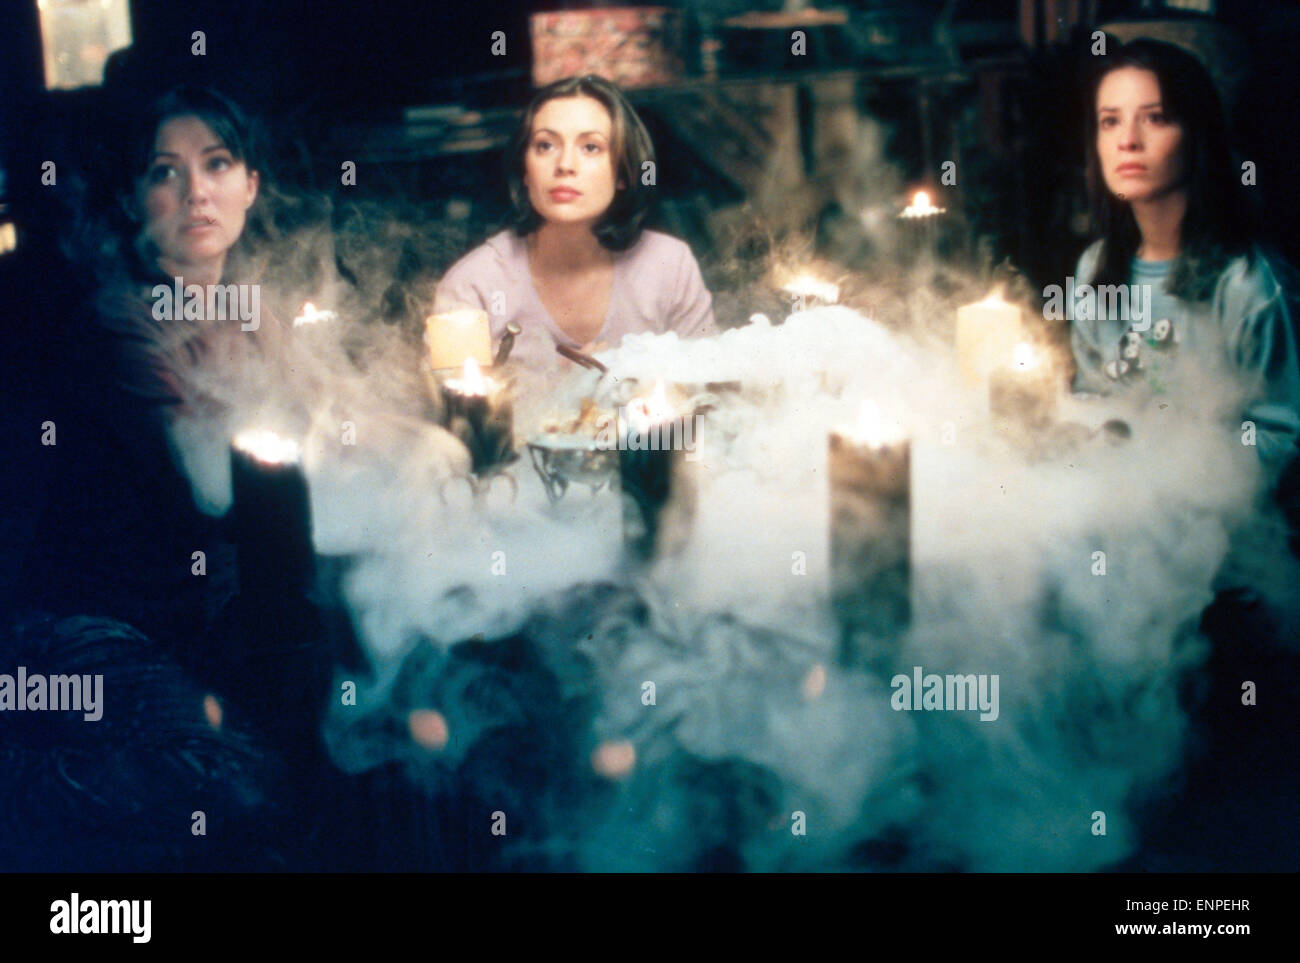 Charmed, aka: Charmed - Zauberhafte Hexen, Fernsehserie, USA 1998 - 2006, Staffel 1, Episode 9: 'The Witch Is back' Darsteller:  Stock Photo